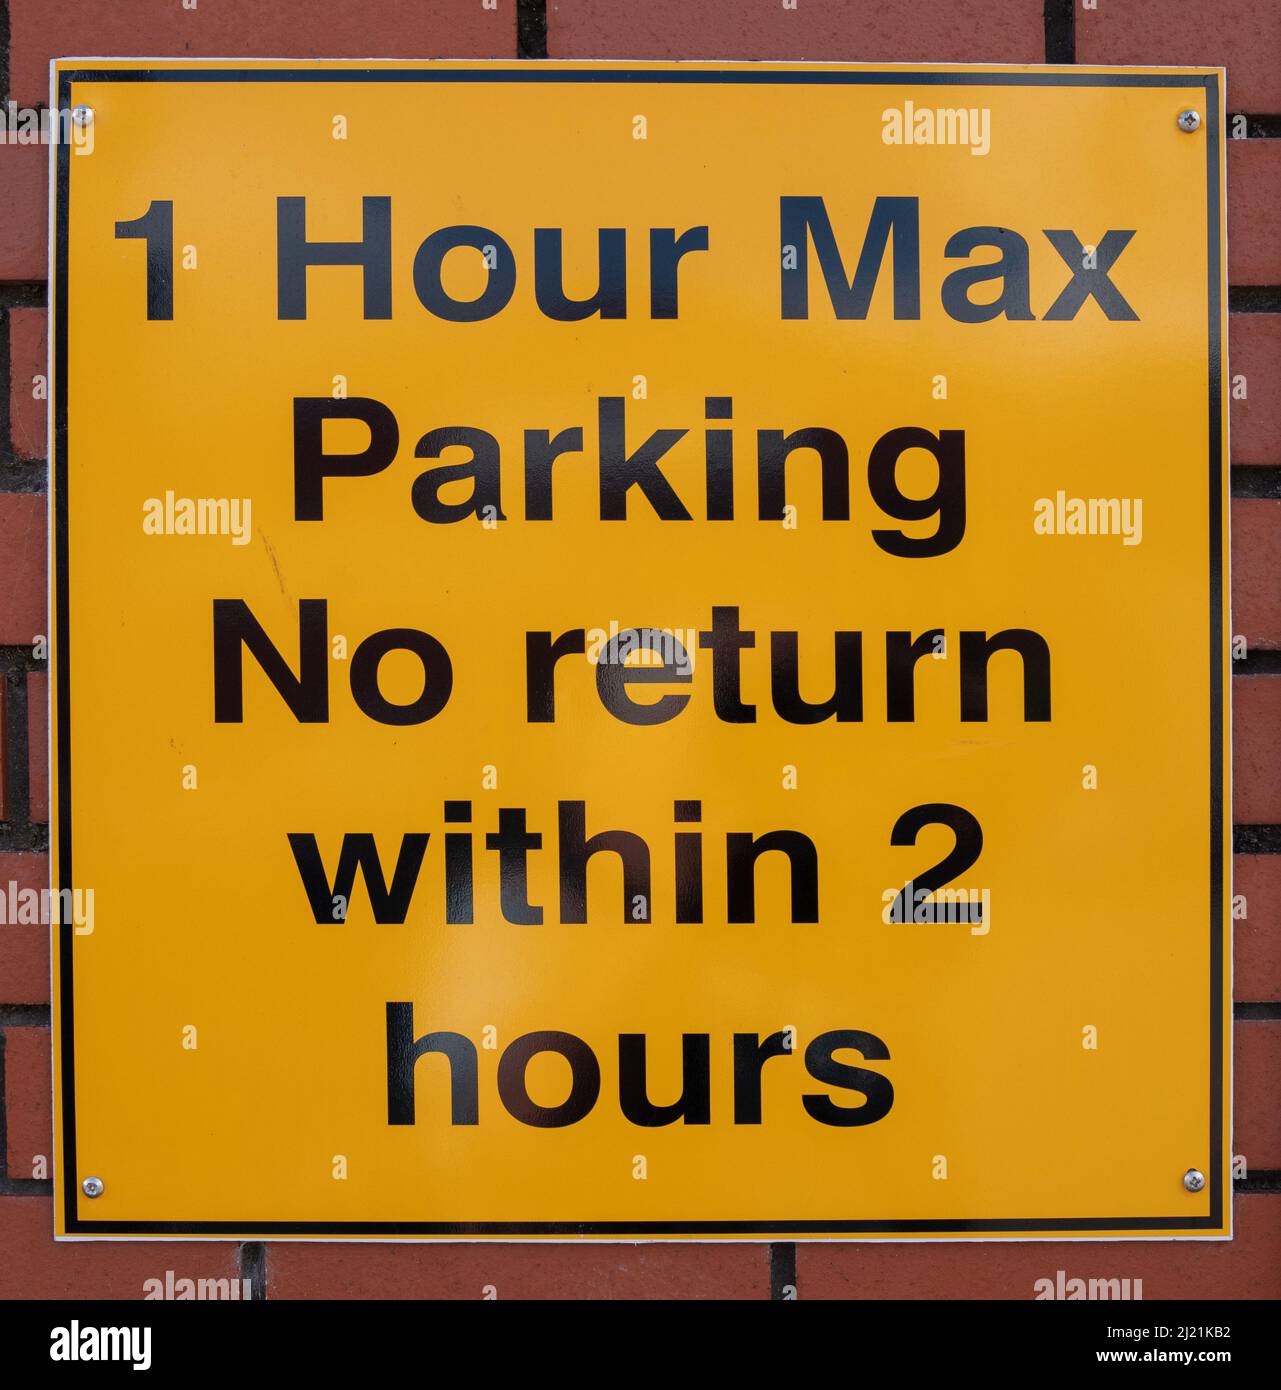 1 Hour Max Parking sign black text on yellow background Stock Photo